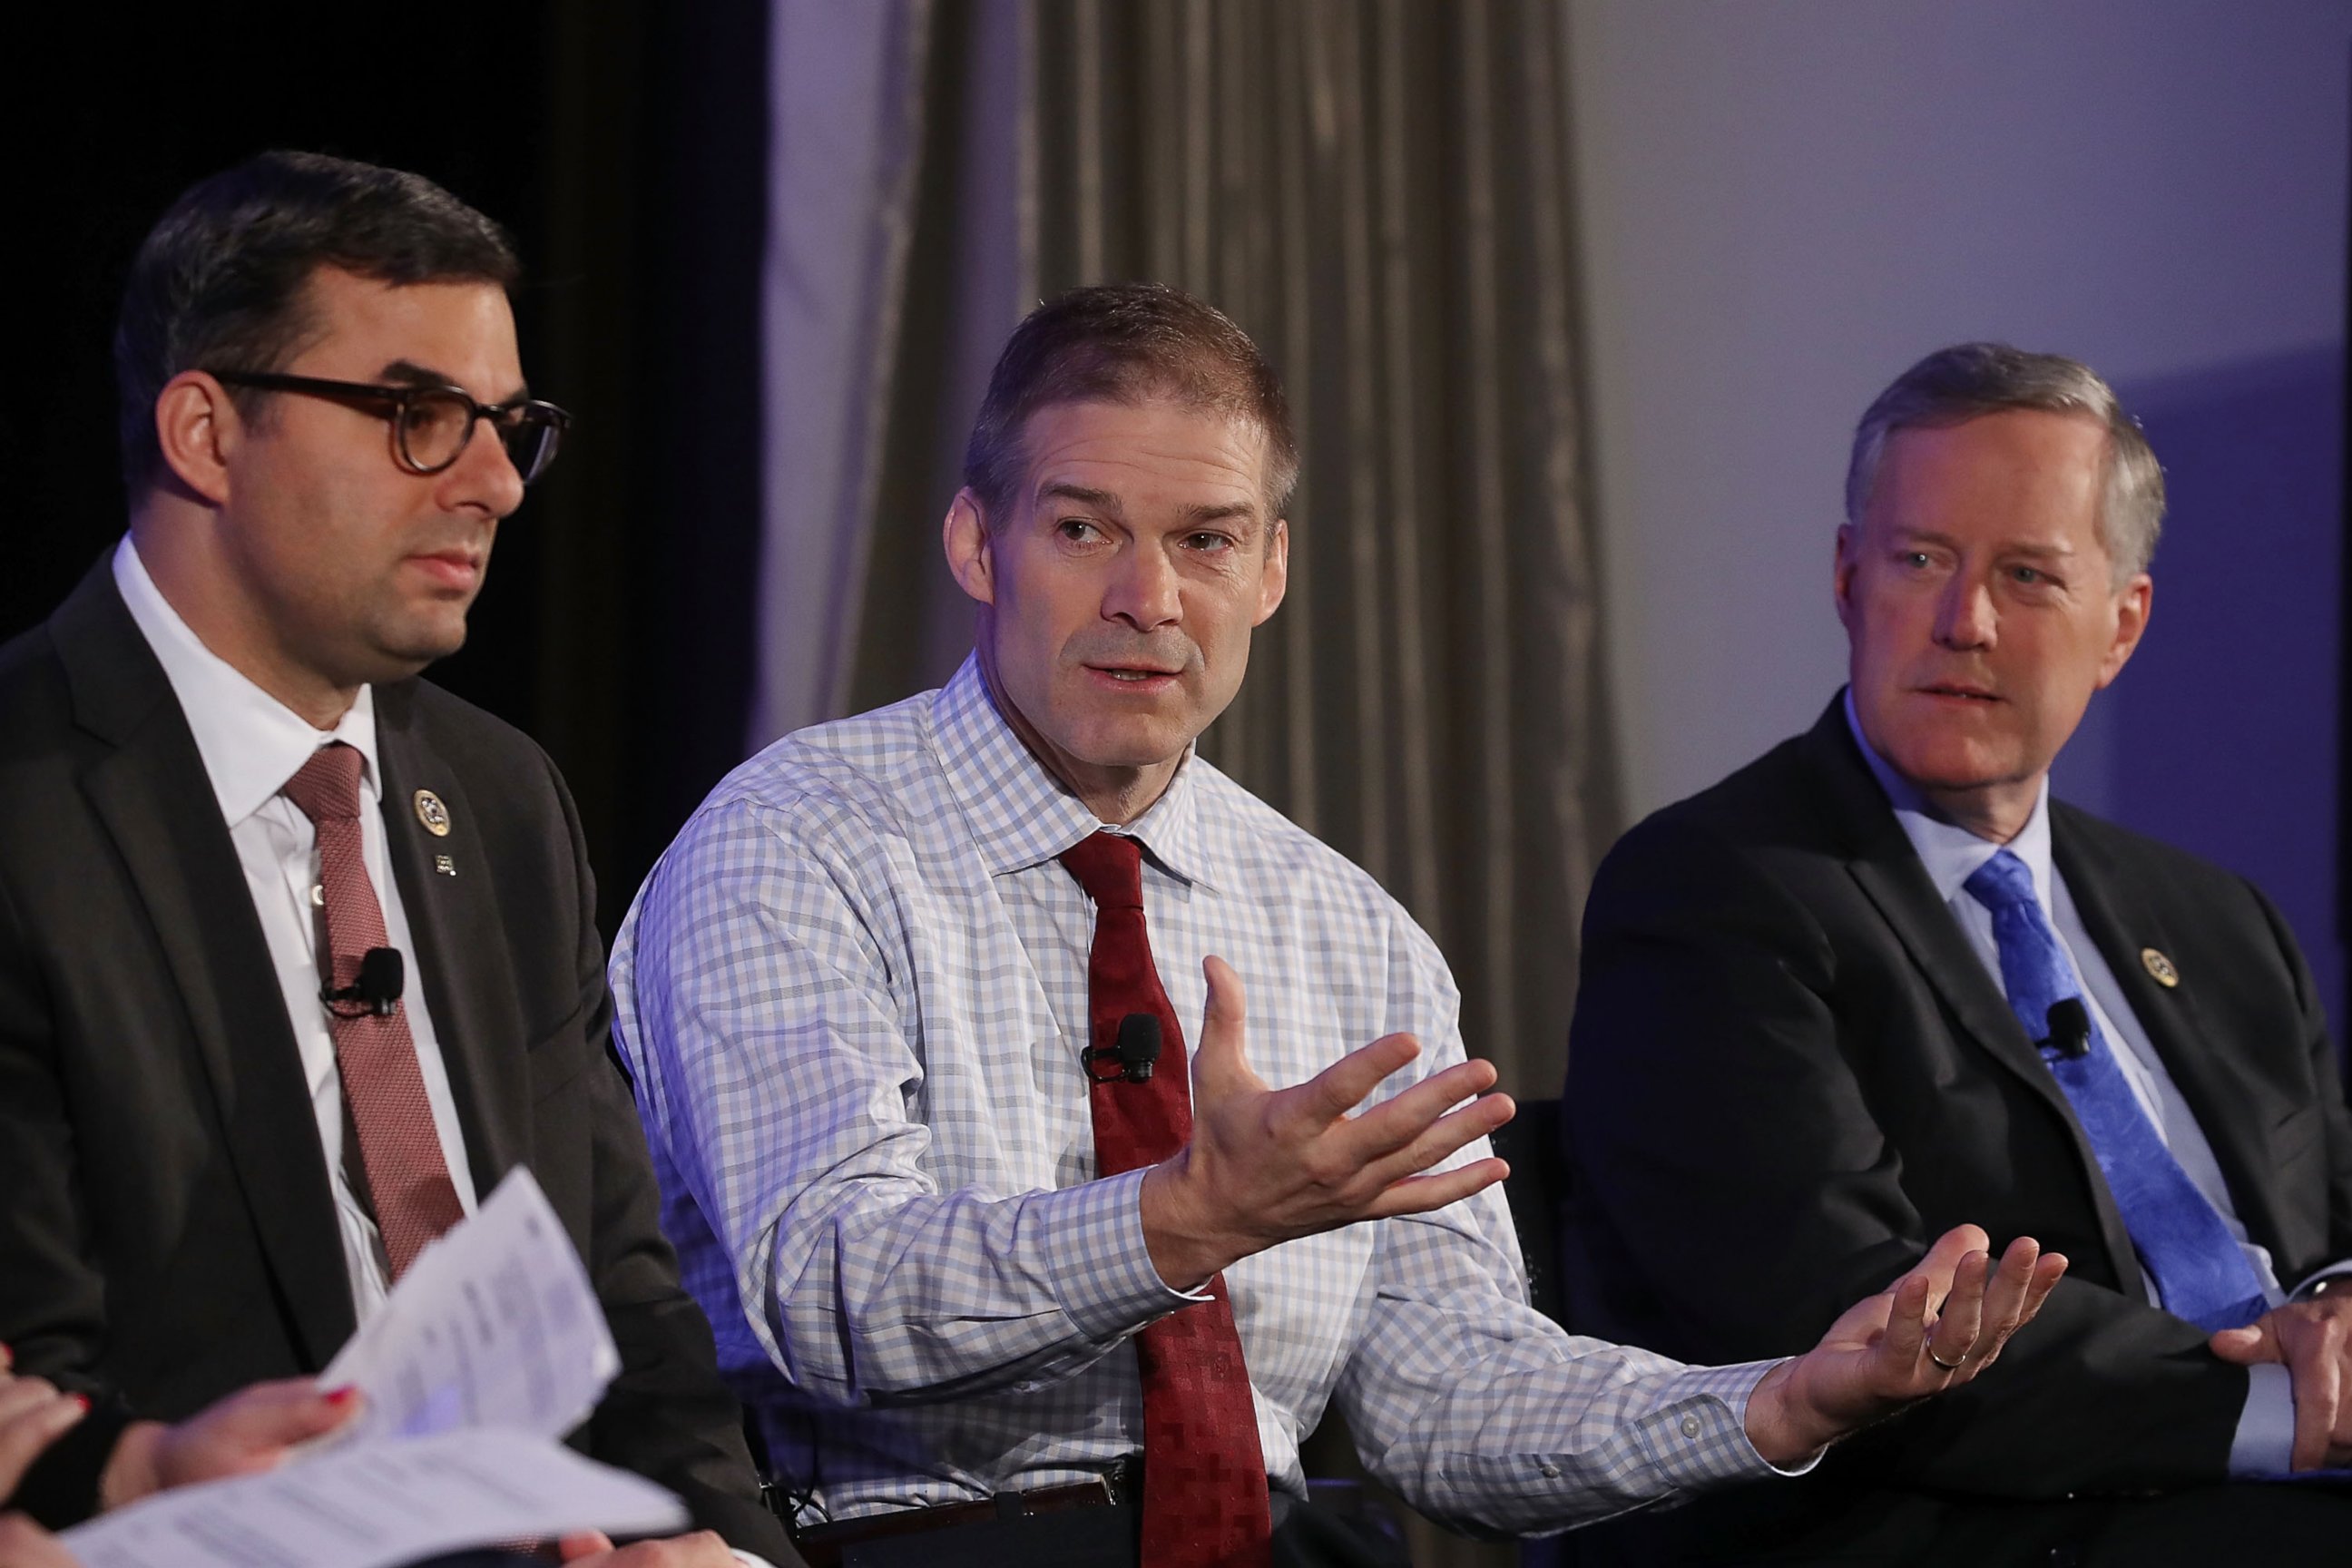 PHOTO: Members of the House Freedom Caucus, (L-R) Rep. Justin Amash (R-MI), Rep. Jim Jordan (R-OH) and Chairman Mark Meadows (R-NC) participate in a Politico Playbook Breakfast interview at the W Hotel, on April 6, 2017, in Washington.